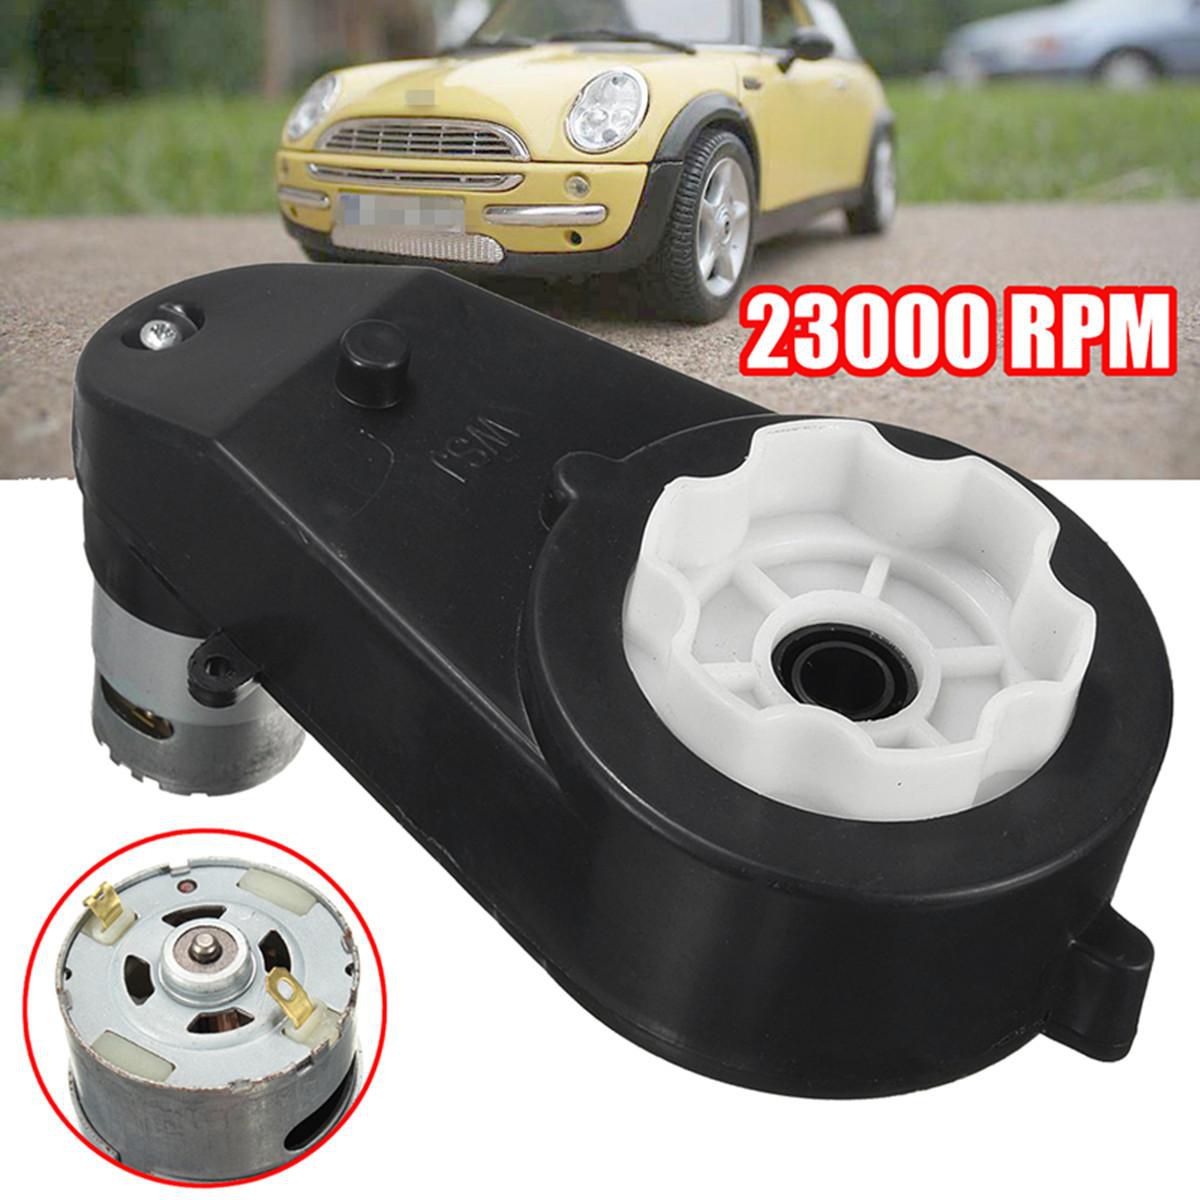 23000 RPM 12V Electric Motor Gear Box For Ride On Car Bike Kids Toy Spare 